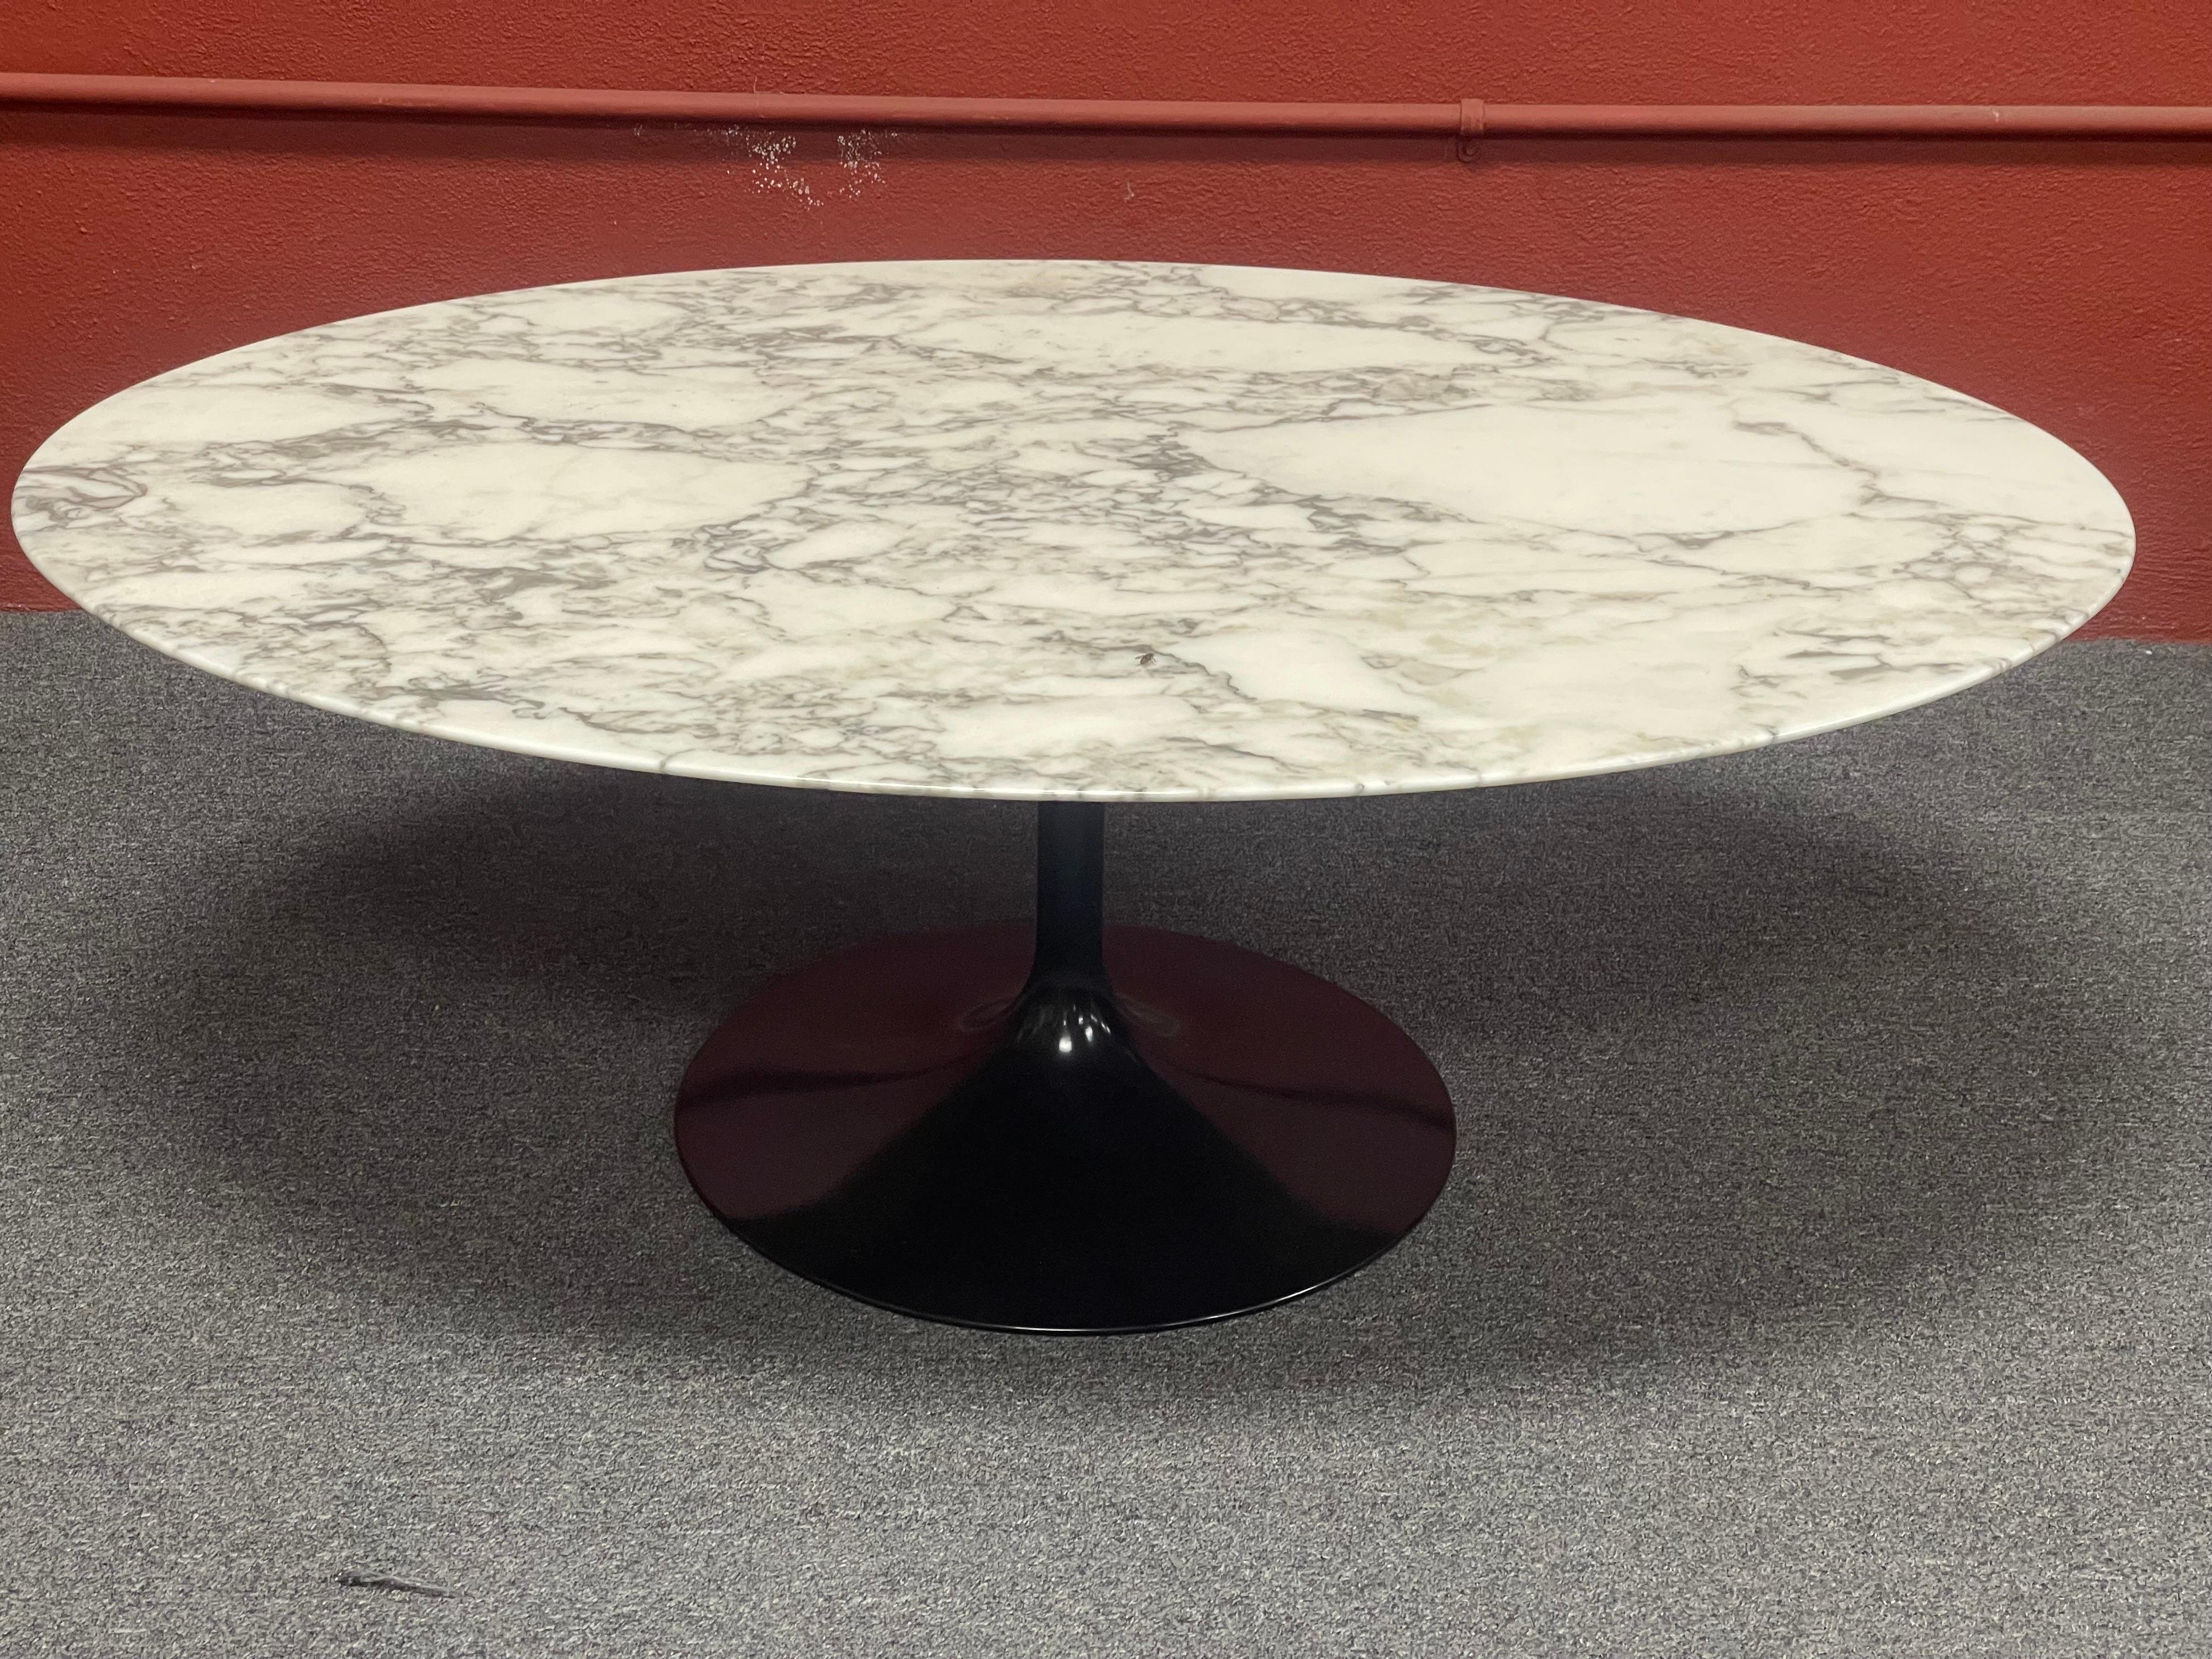 Authentic Polished Carrara Marble Top Coffee Table by Eero Saarinen for Knoll 6